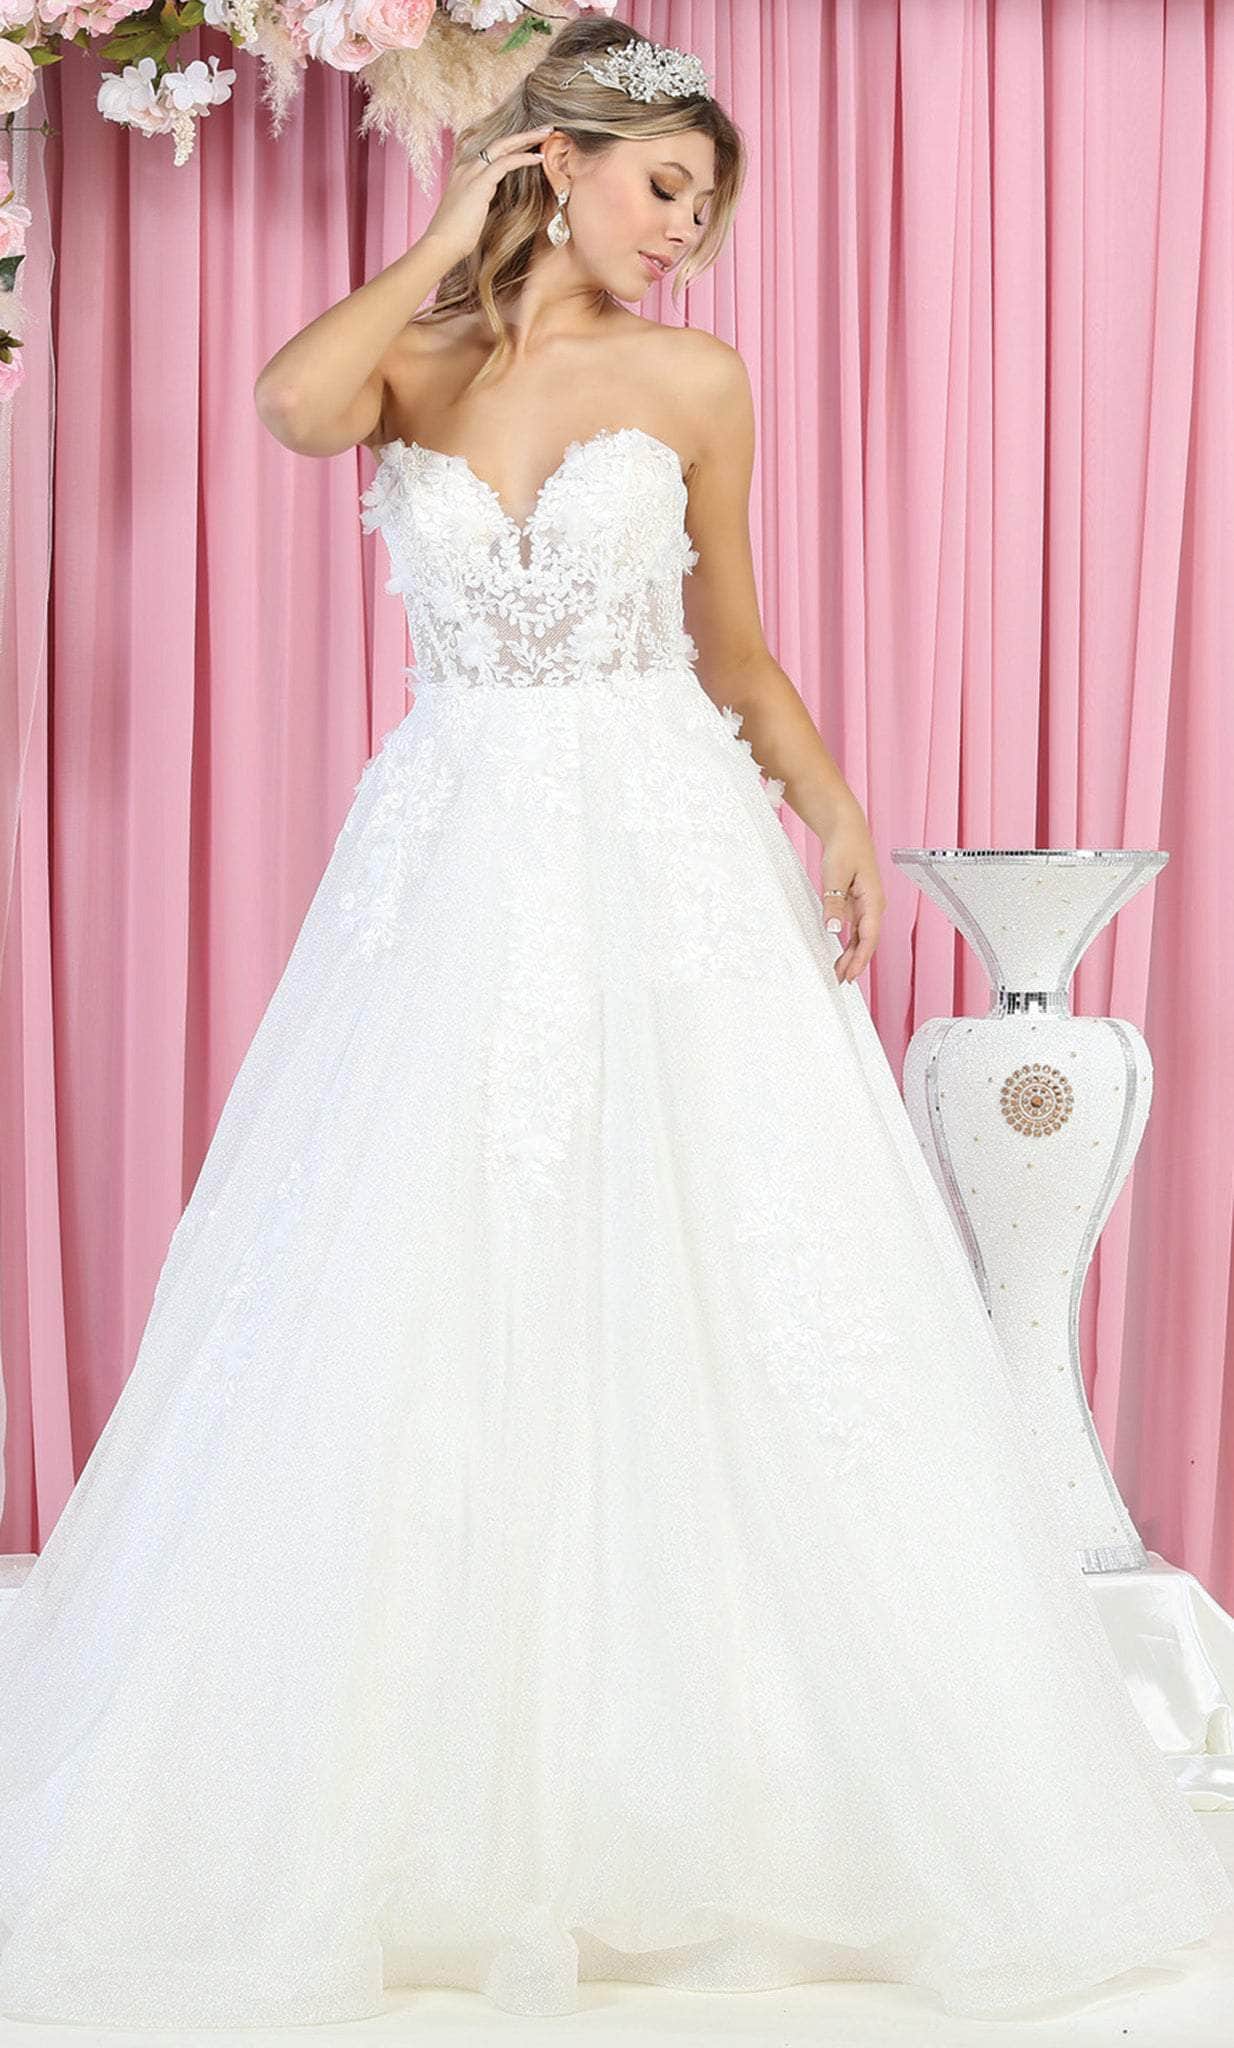 May Queen RQ7938 - Floral Strapless Bridal Dress Bridal Dresses 4 / Ivory